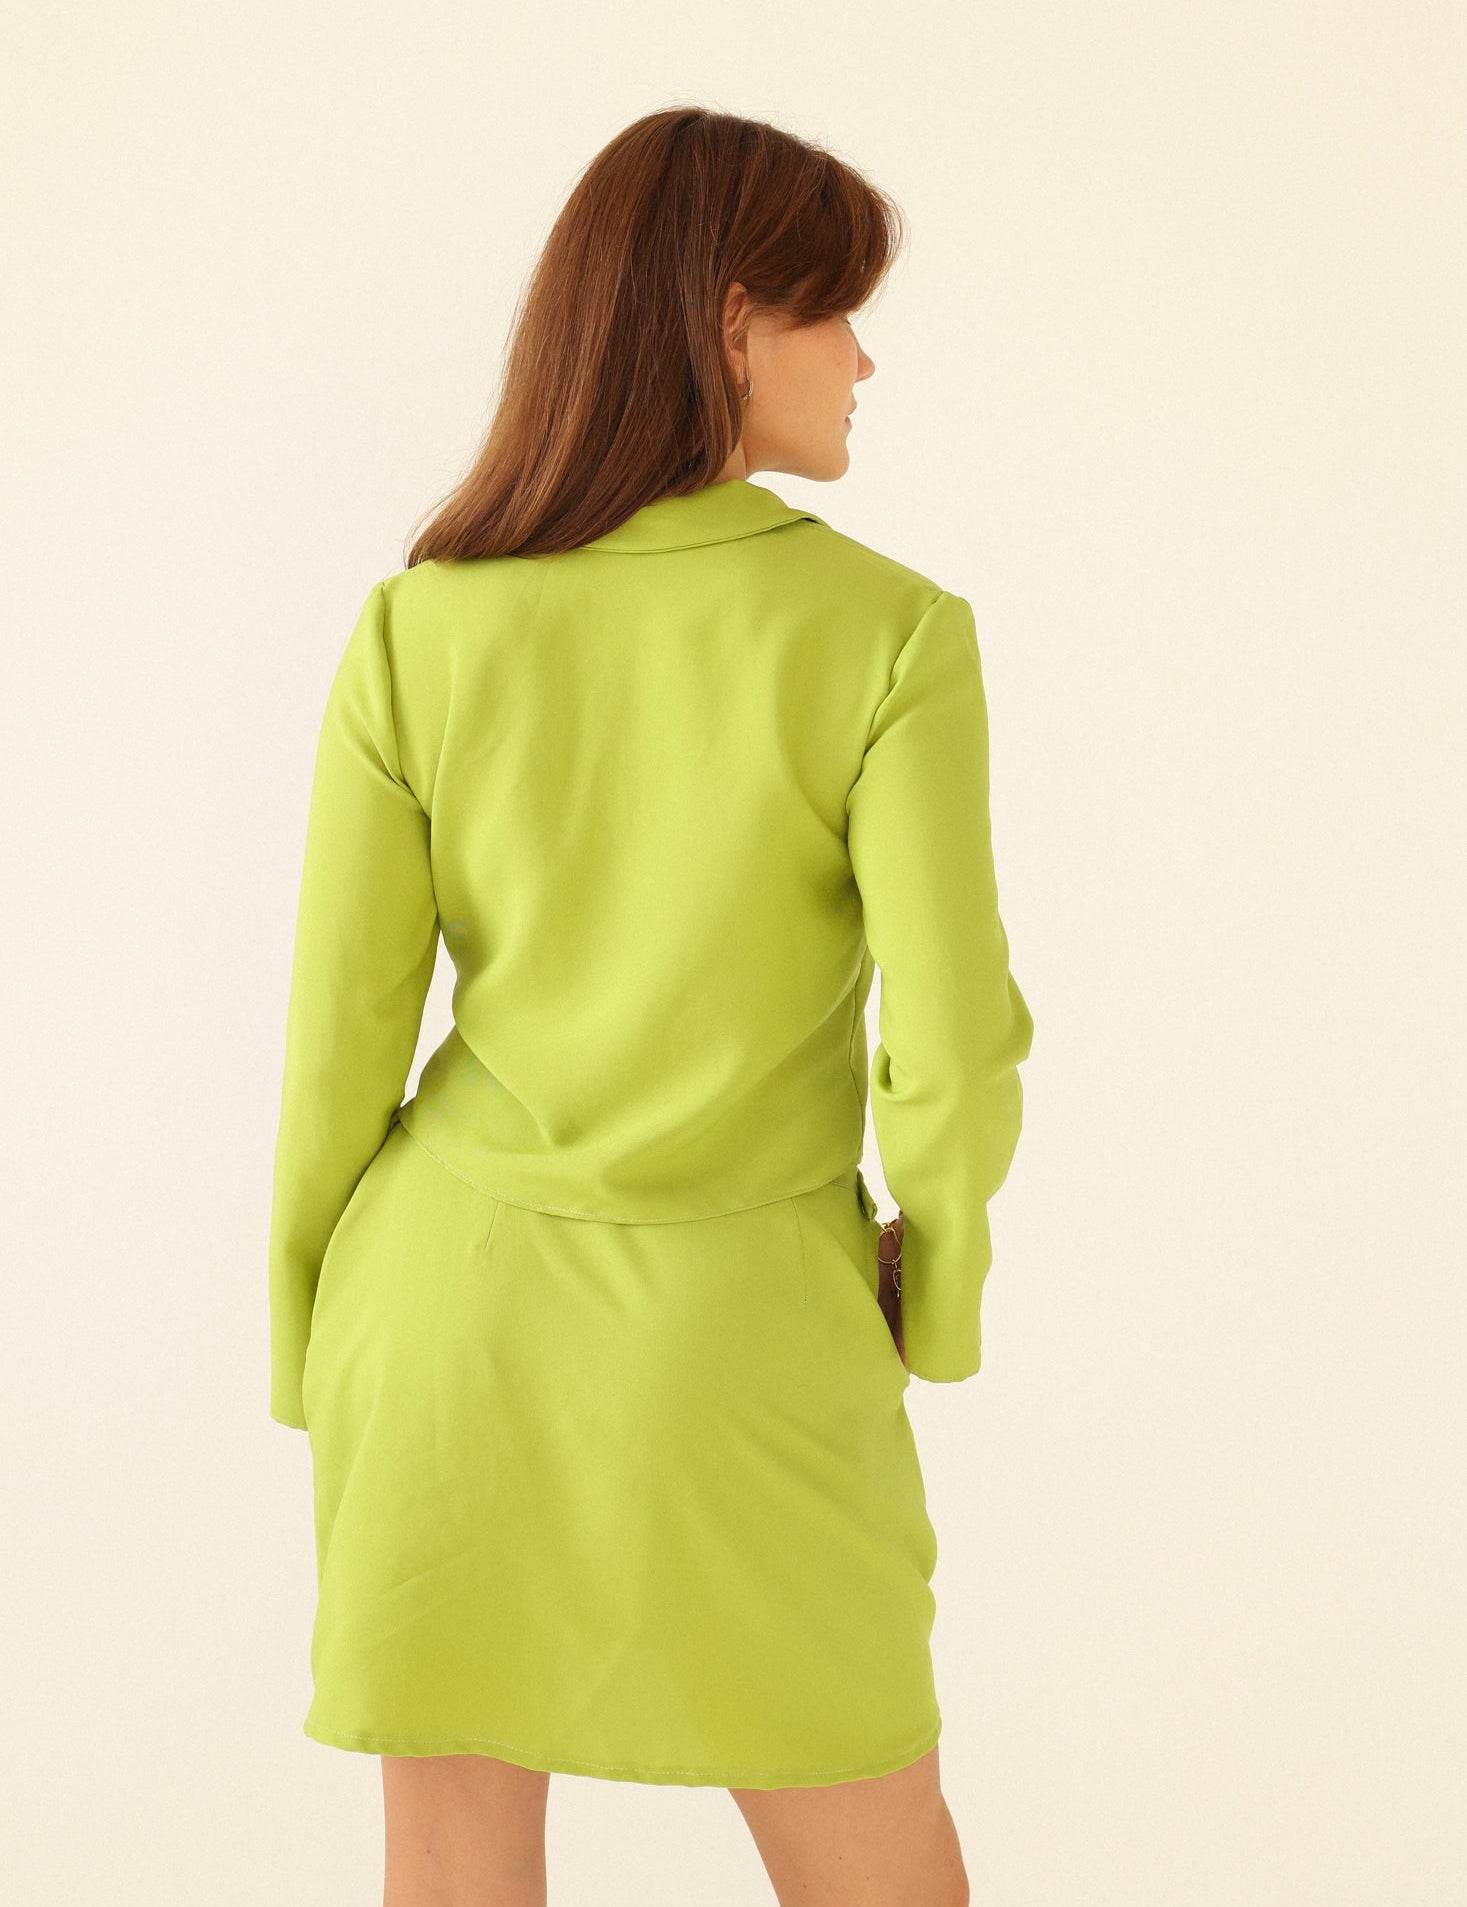 deidei-deidei-two-piece-co-ord-ada-blouse-and-noor-mini-skirt-in-chartreuse-5088_bfde82be-3c79-49ba-824f-a1afade88783.jpg